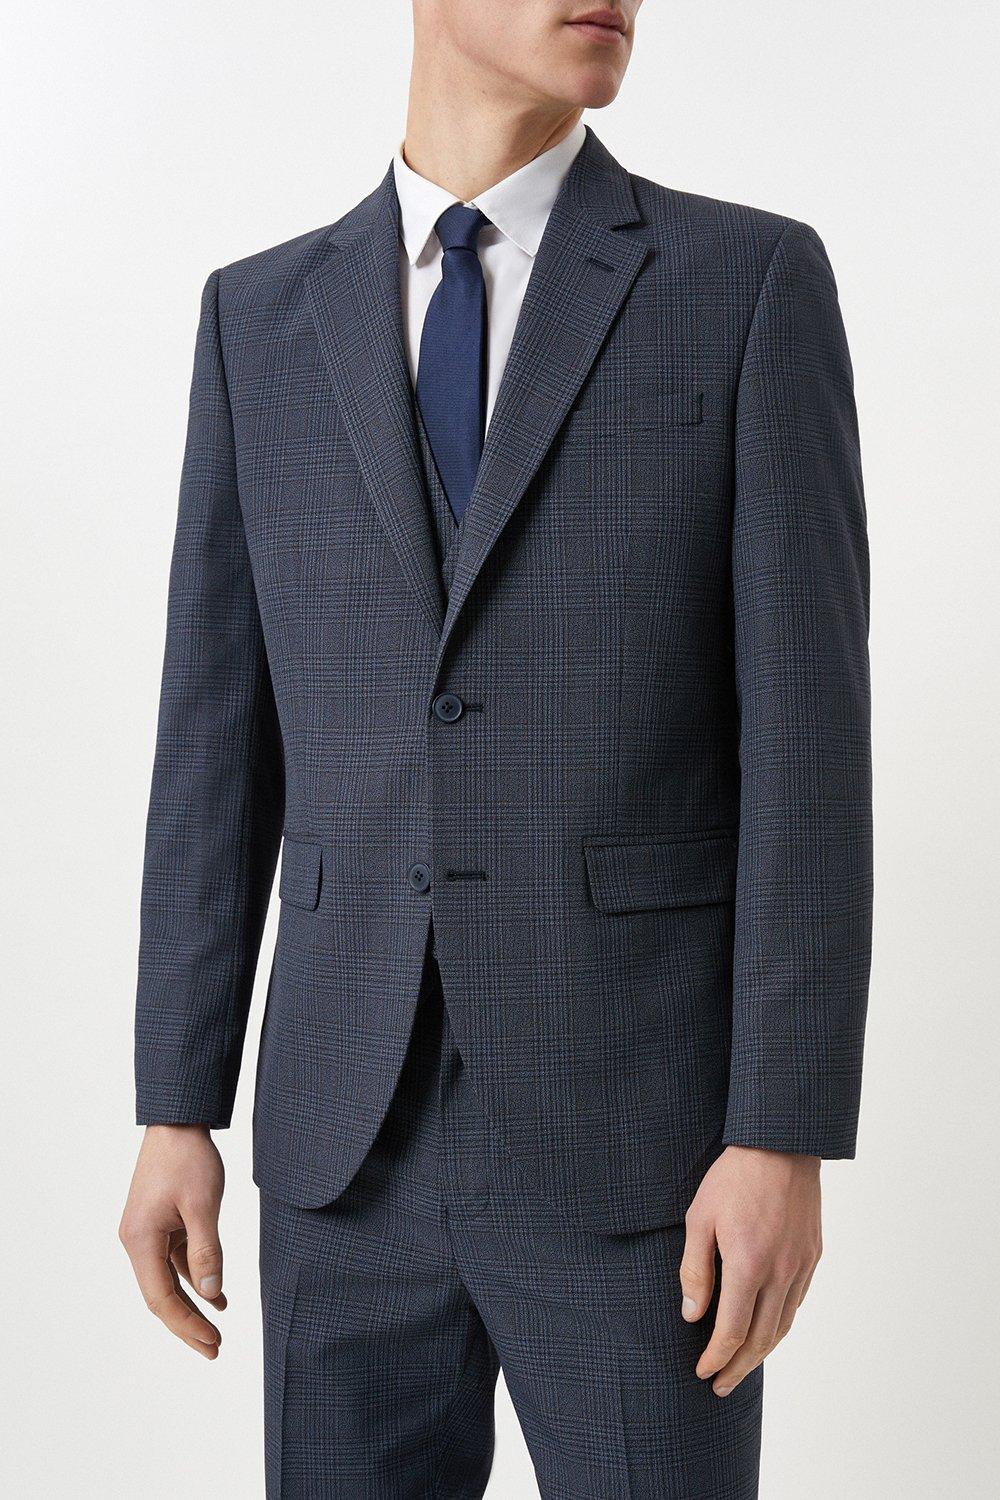 Mens Tailored Fit Navy Overcheck Suit Jacket